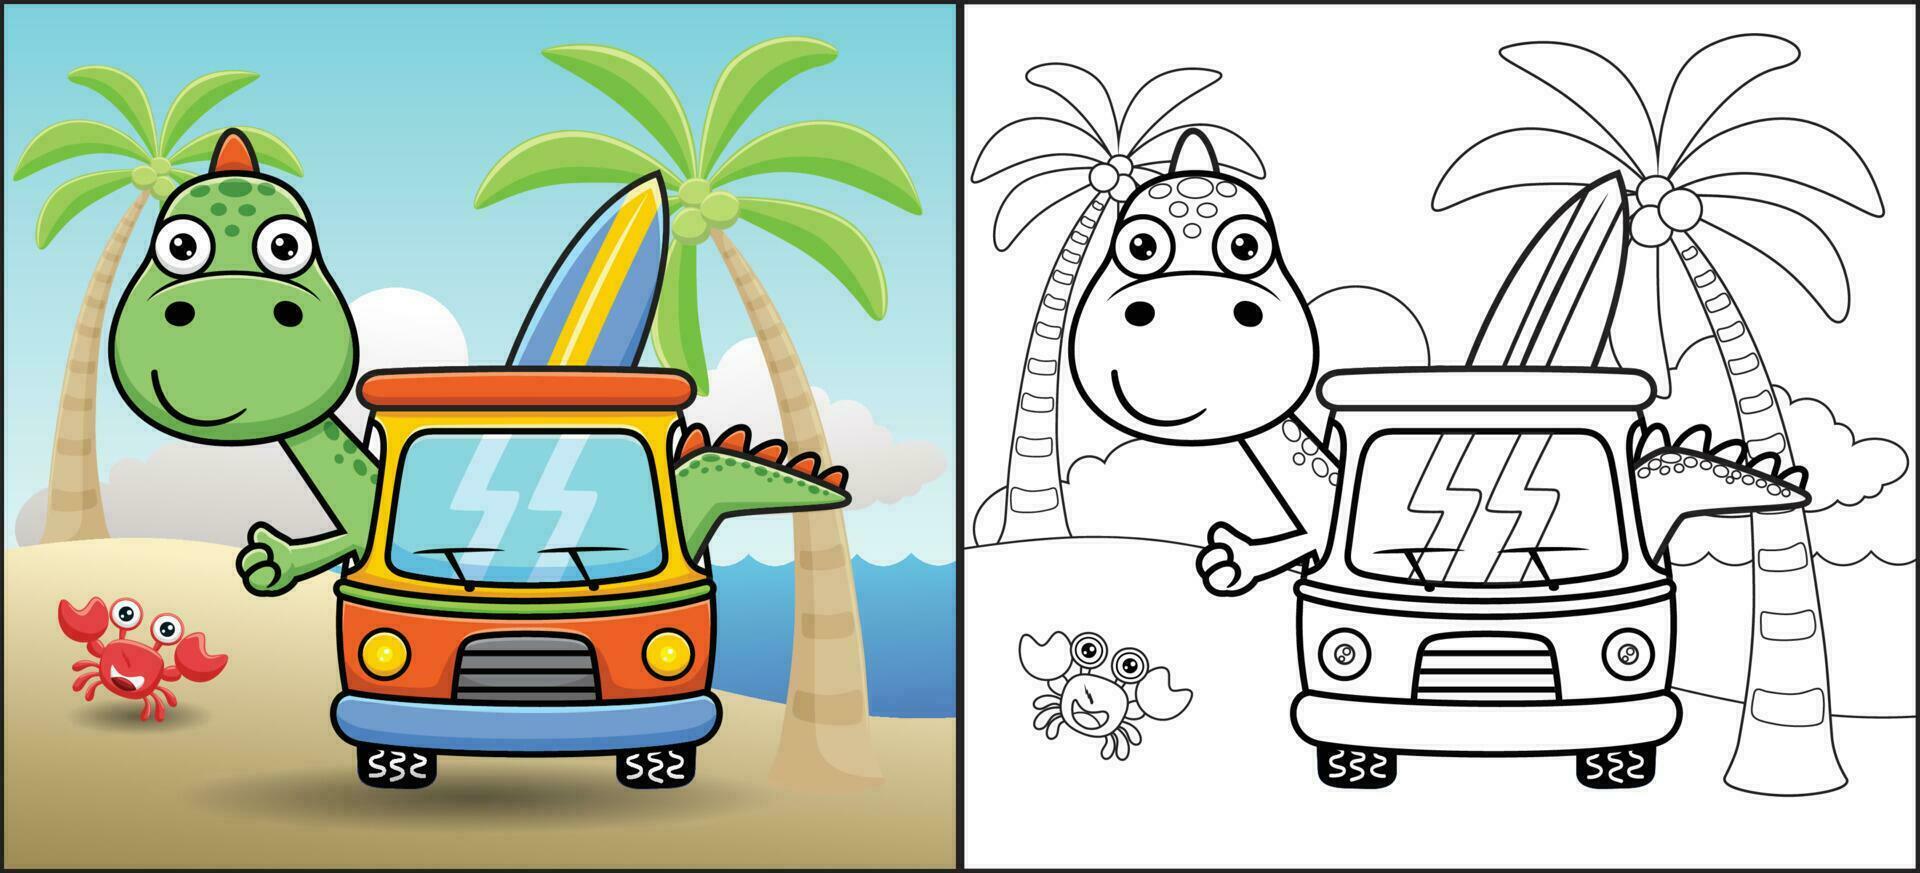 Coloring book or page, dinosaur cartoon on car carrying surfboard in the beach with funny crab vector